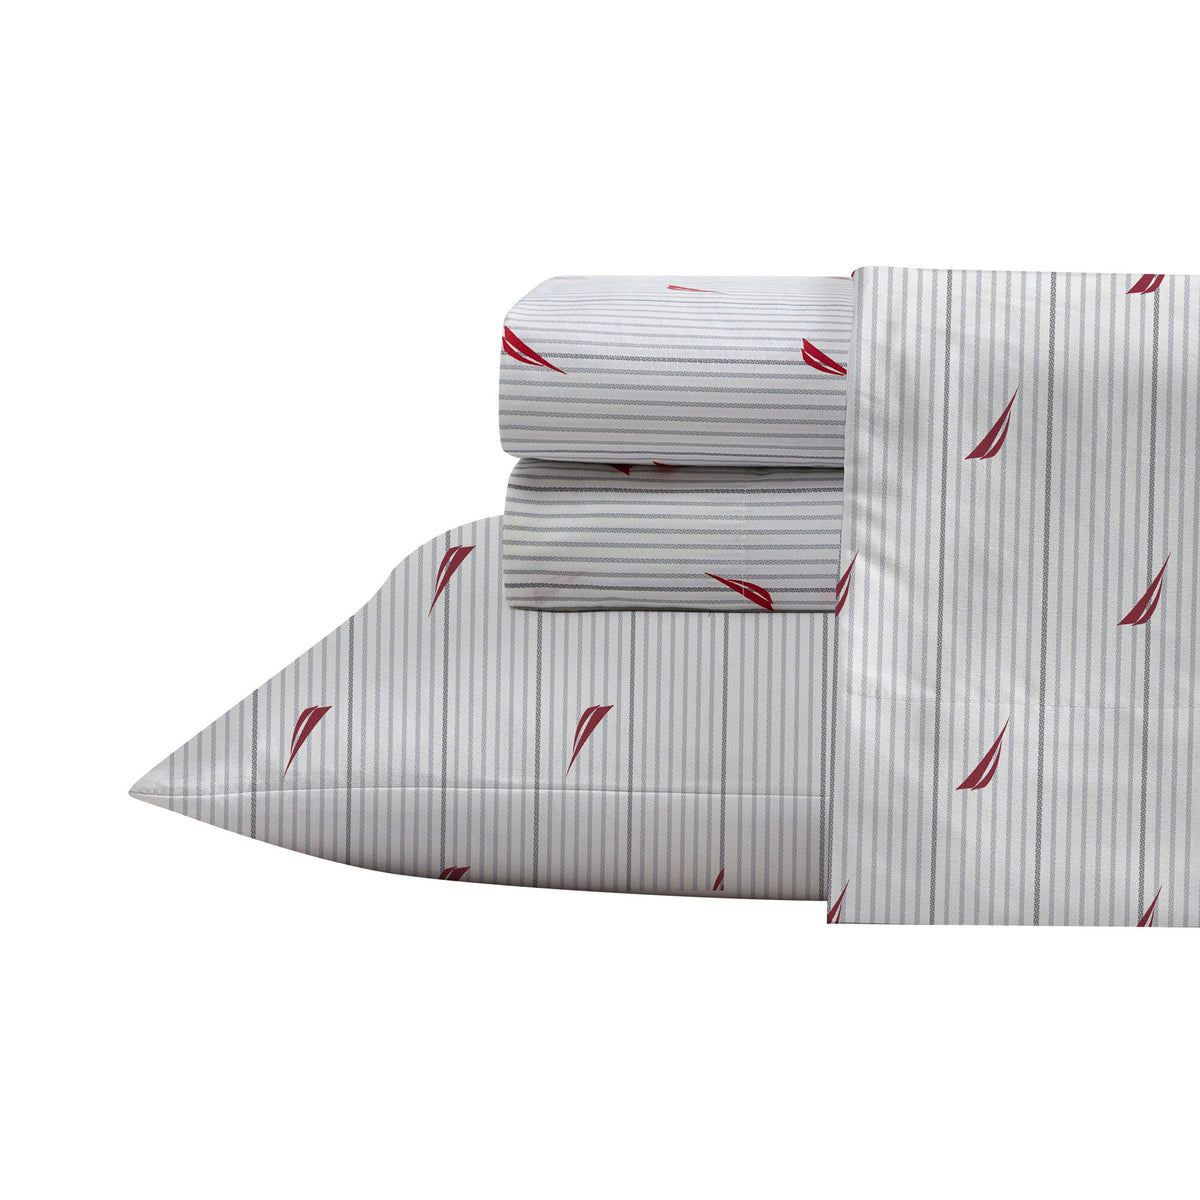 Nautica Audley Striped Red Full Sheet Set Tango Red